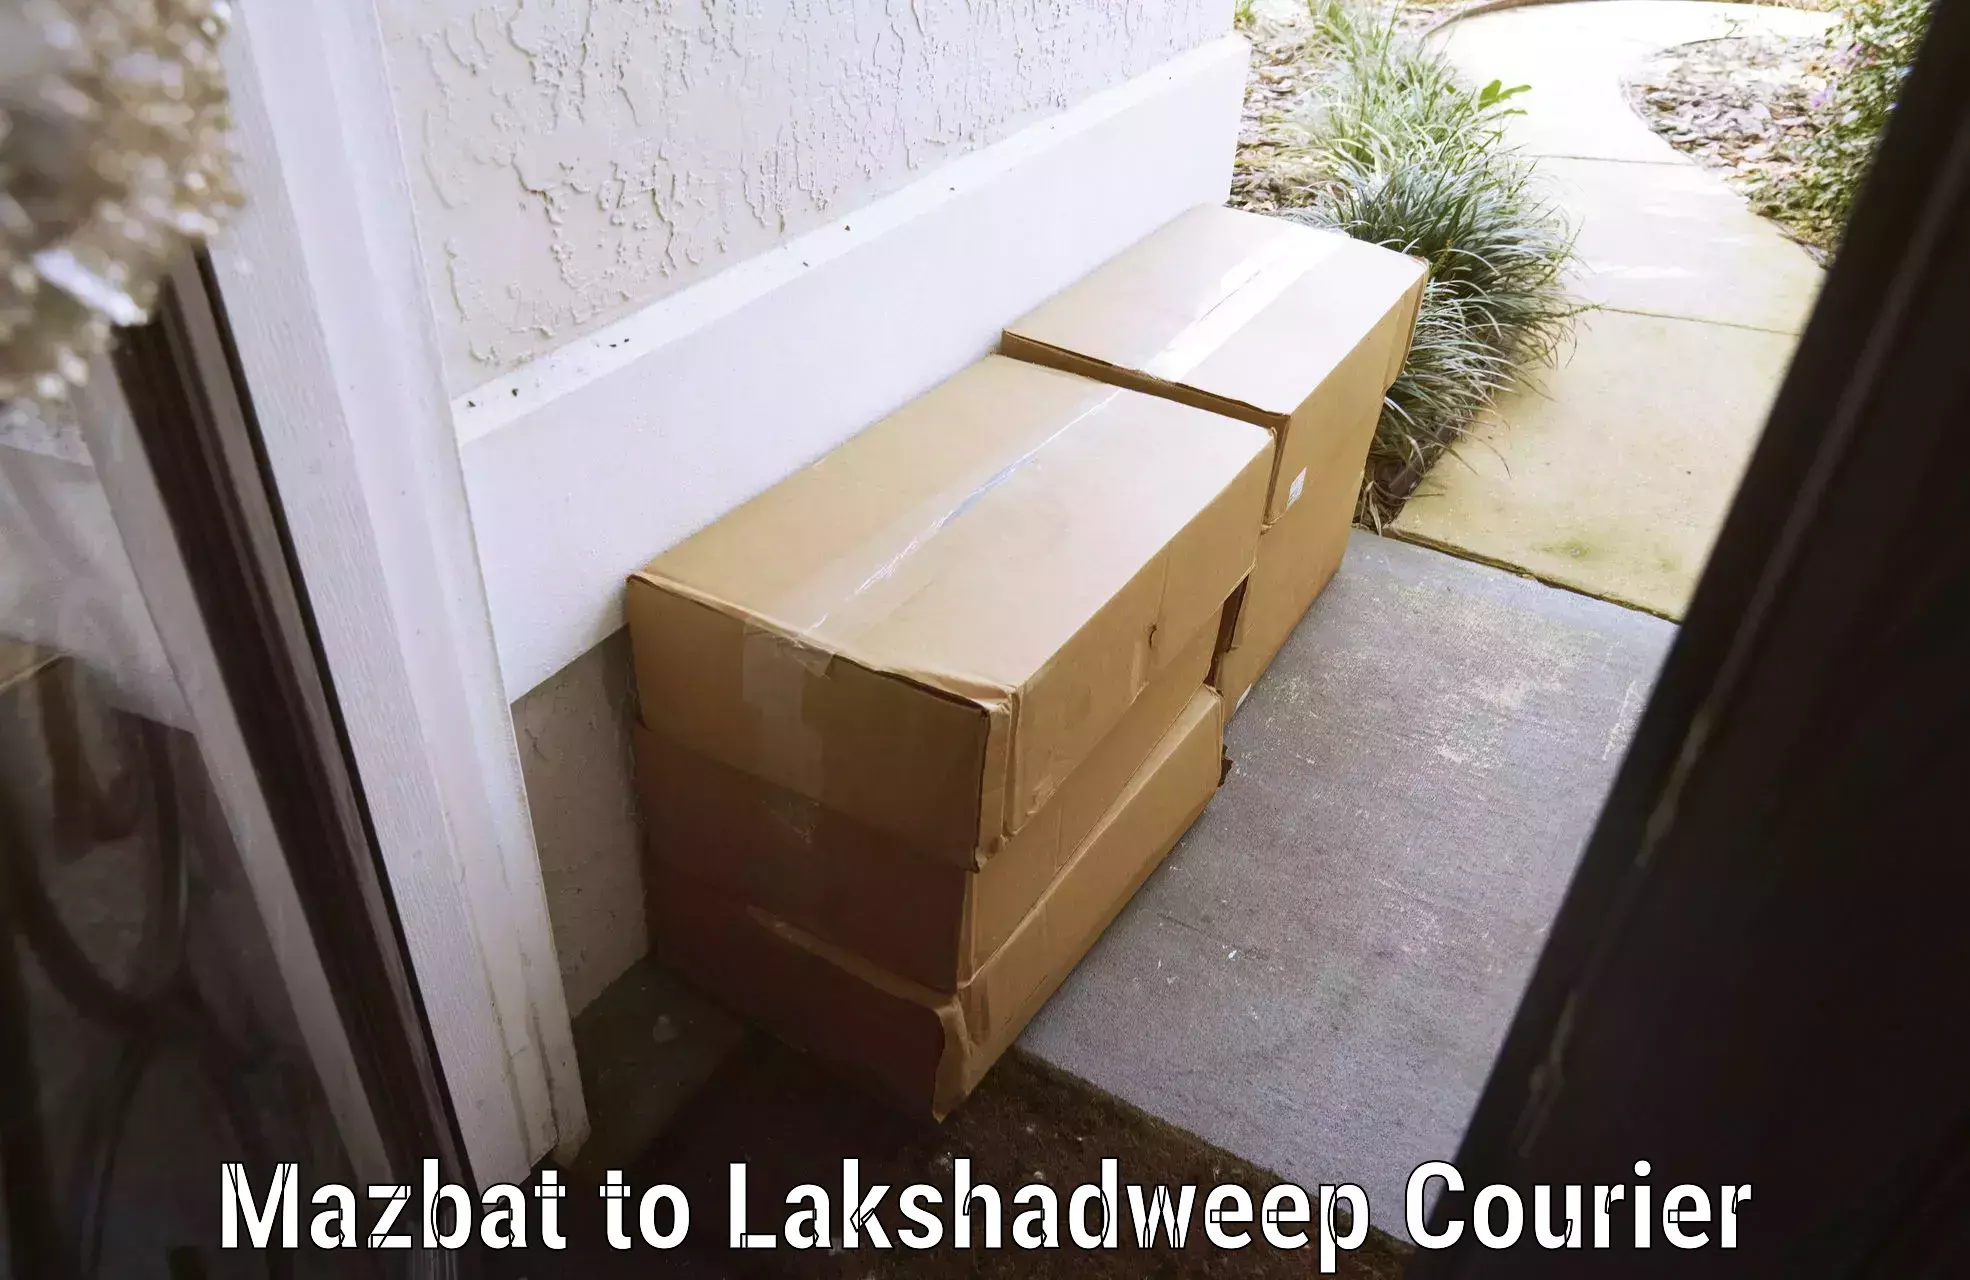 Luggage delivery system Mazbat to Lakshadweep